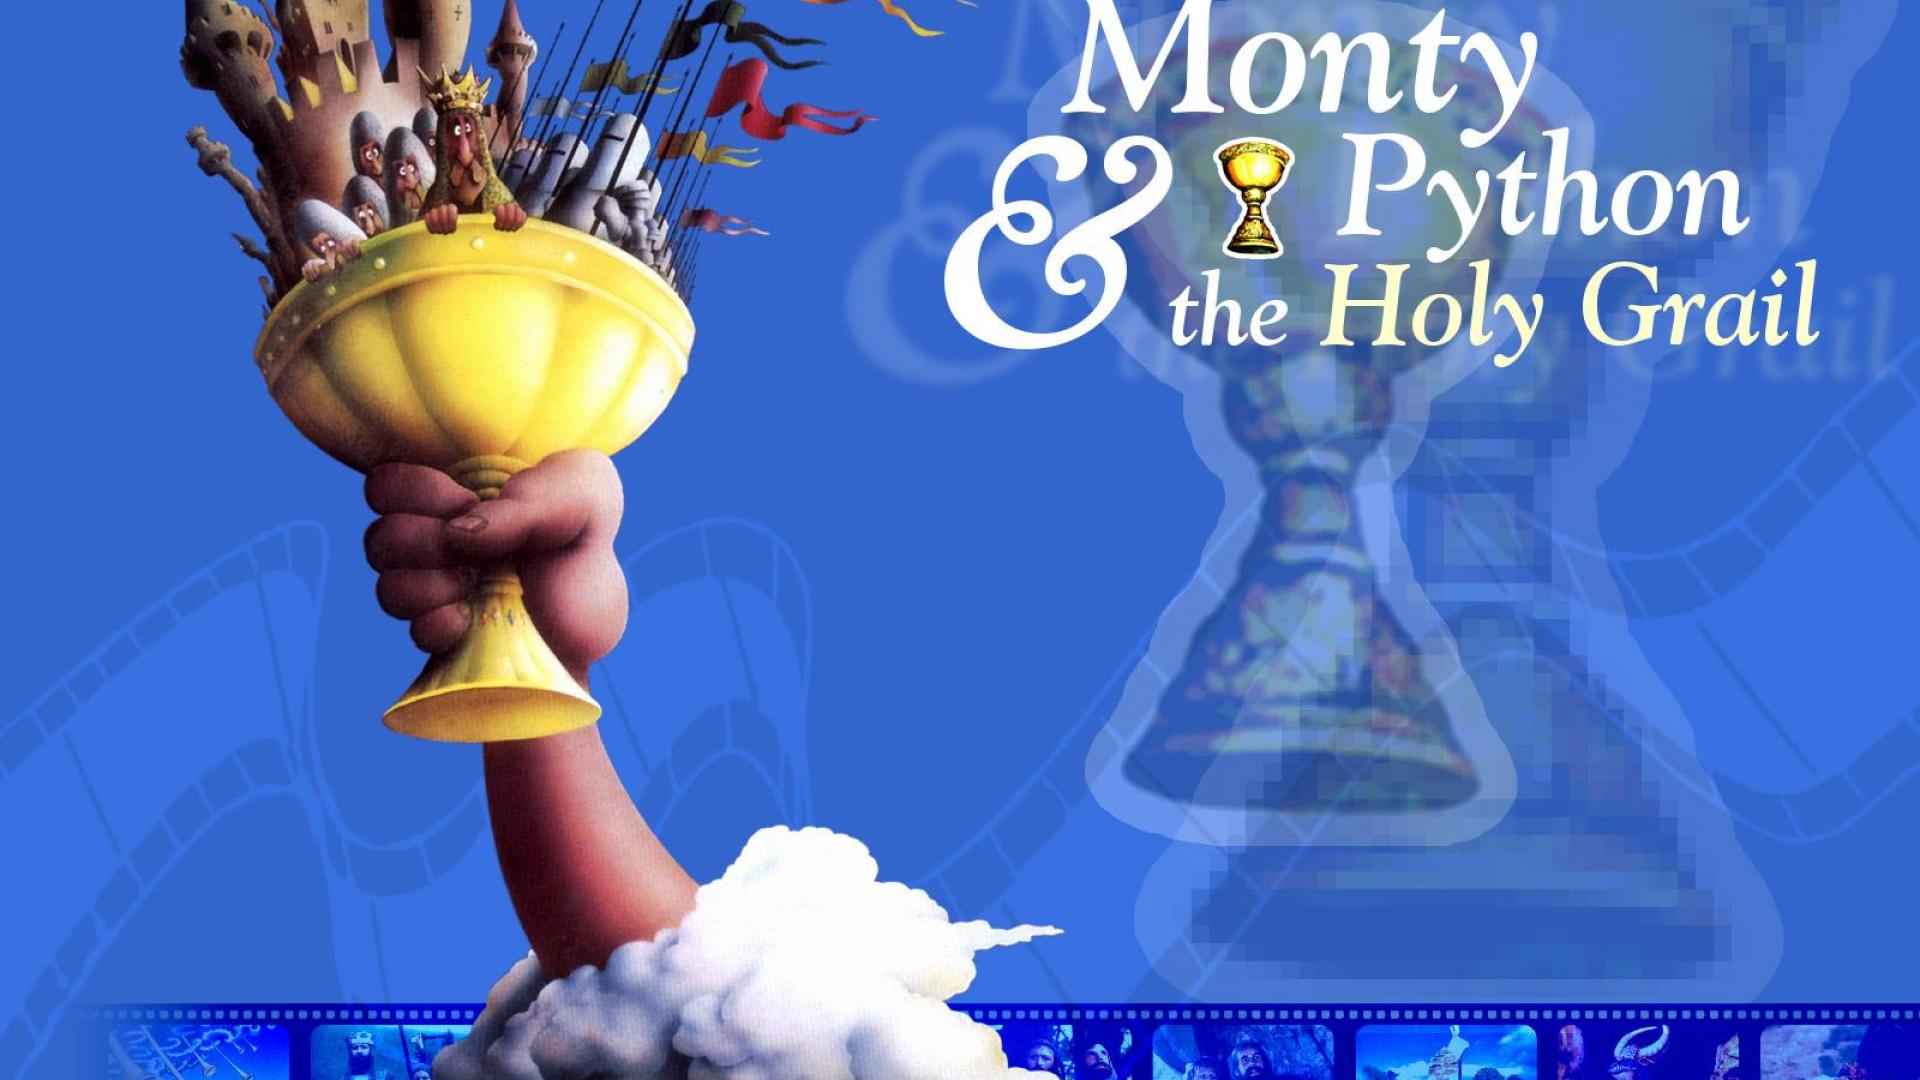 Monty python and the holy grail - (#86570) - High Quality and ...